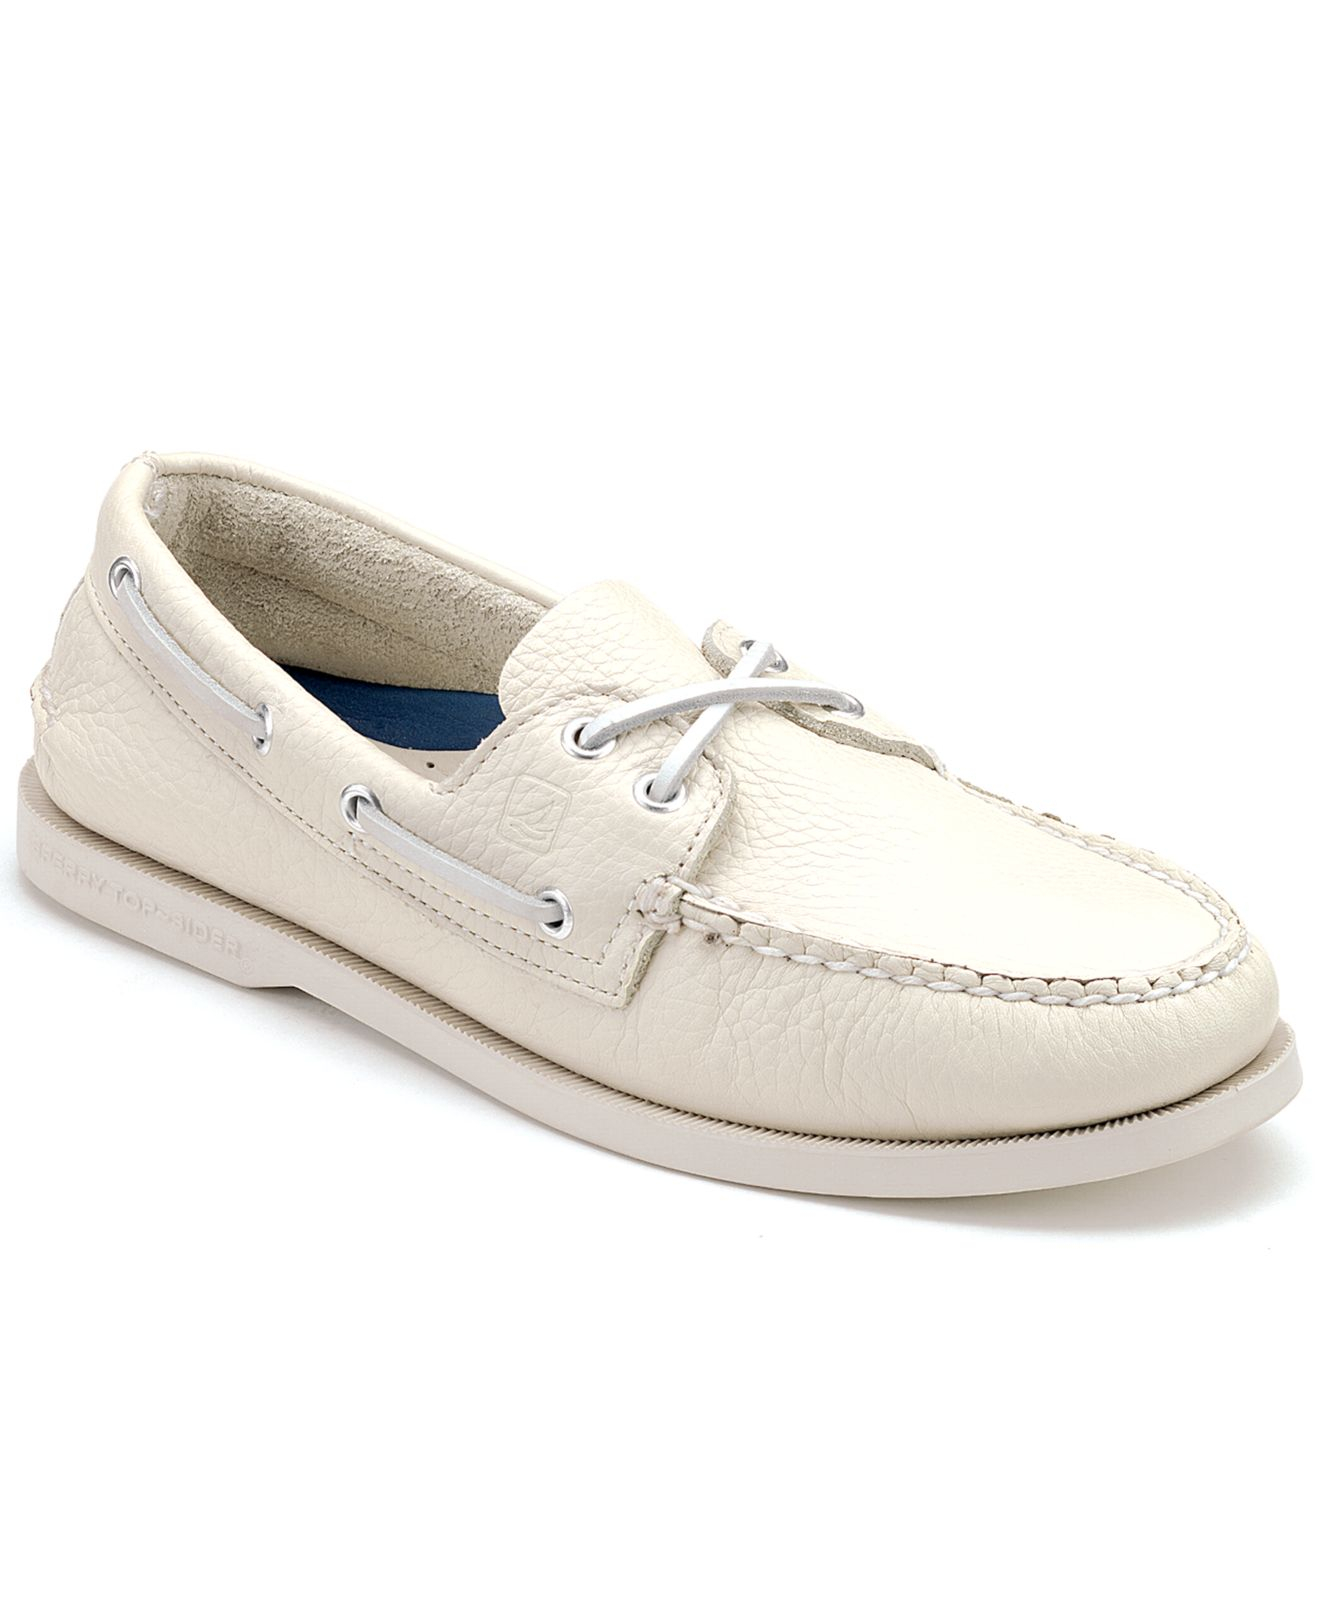 Sperry top-sider Men's Authentic Original A/o Boat Shoes in White for ...